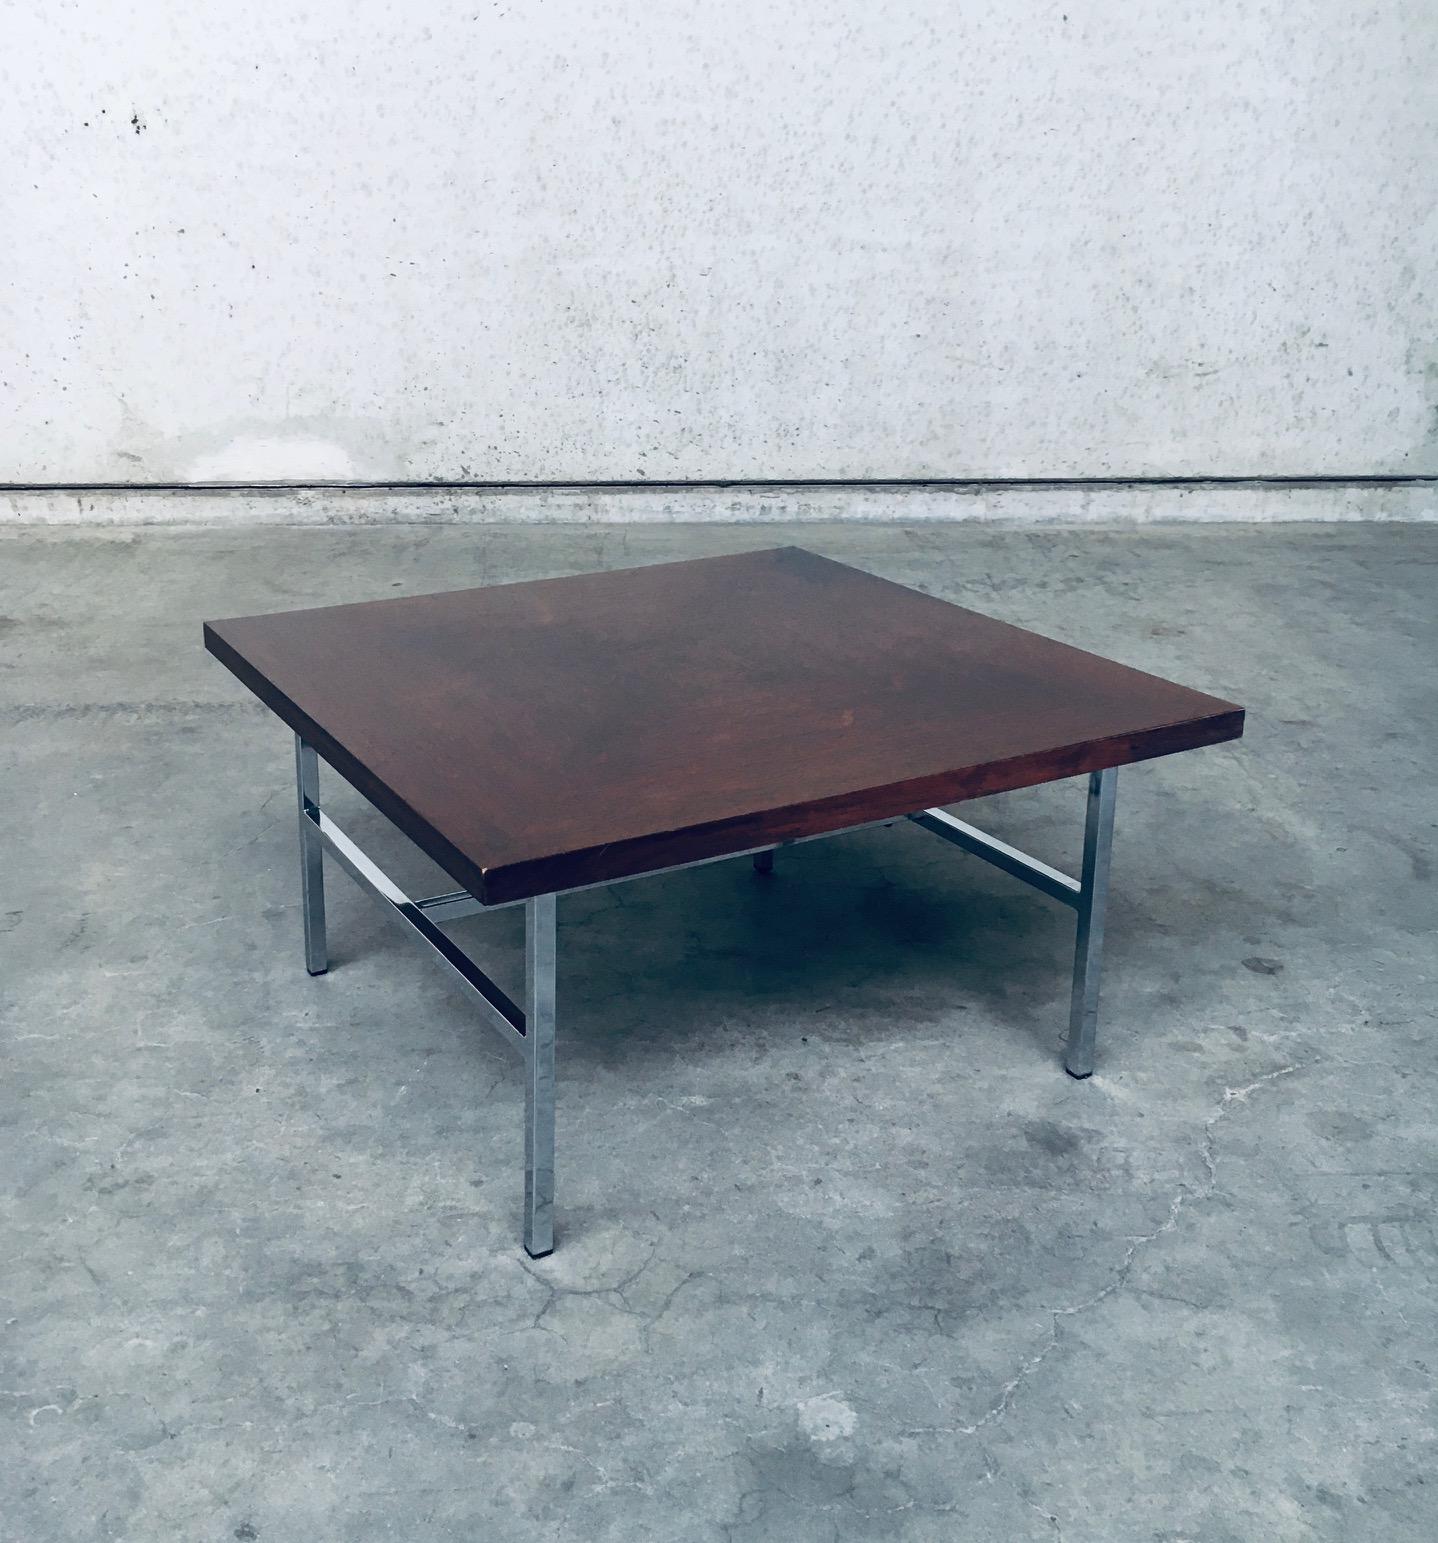 Vintage Midcentury Modern Dutch Design Square Coffee Table. Made in the Netherlands, 1960's. Teak colored veneer diamond shape inlay top with chome steel square base. This comes in very good, all original condition. One small chip at one side corner